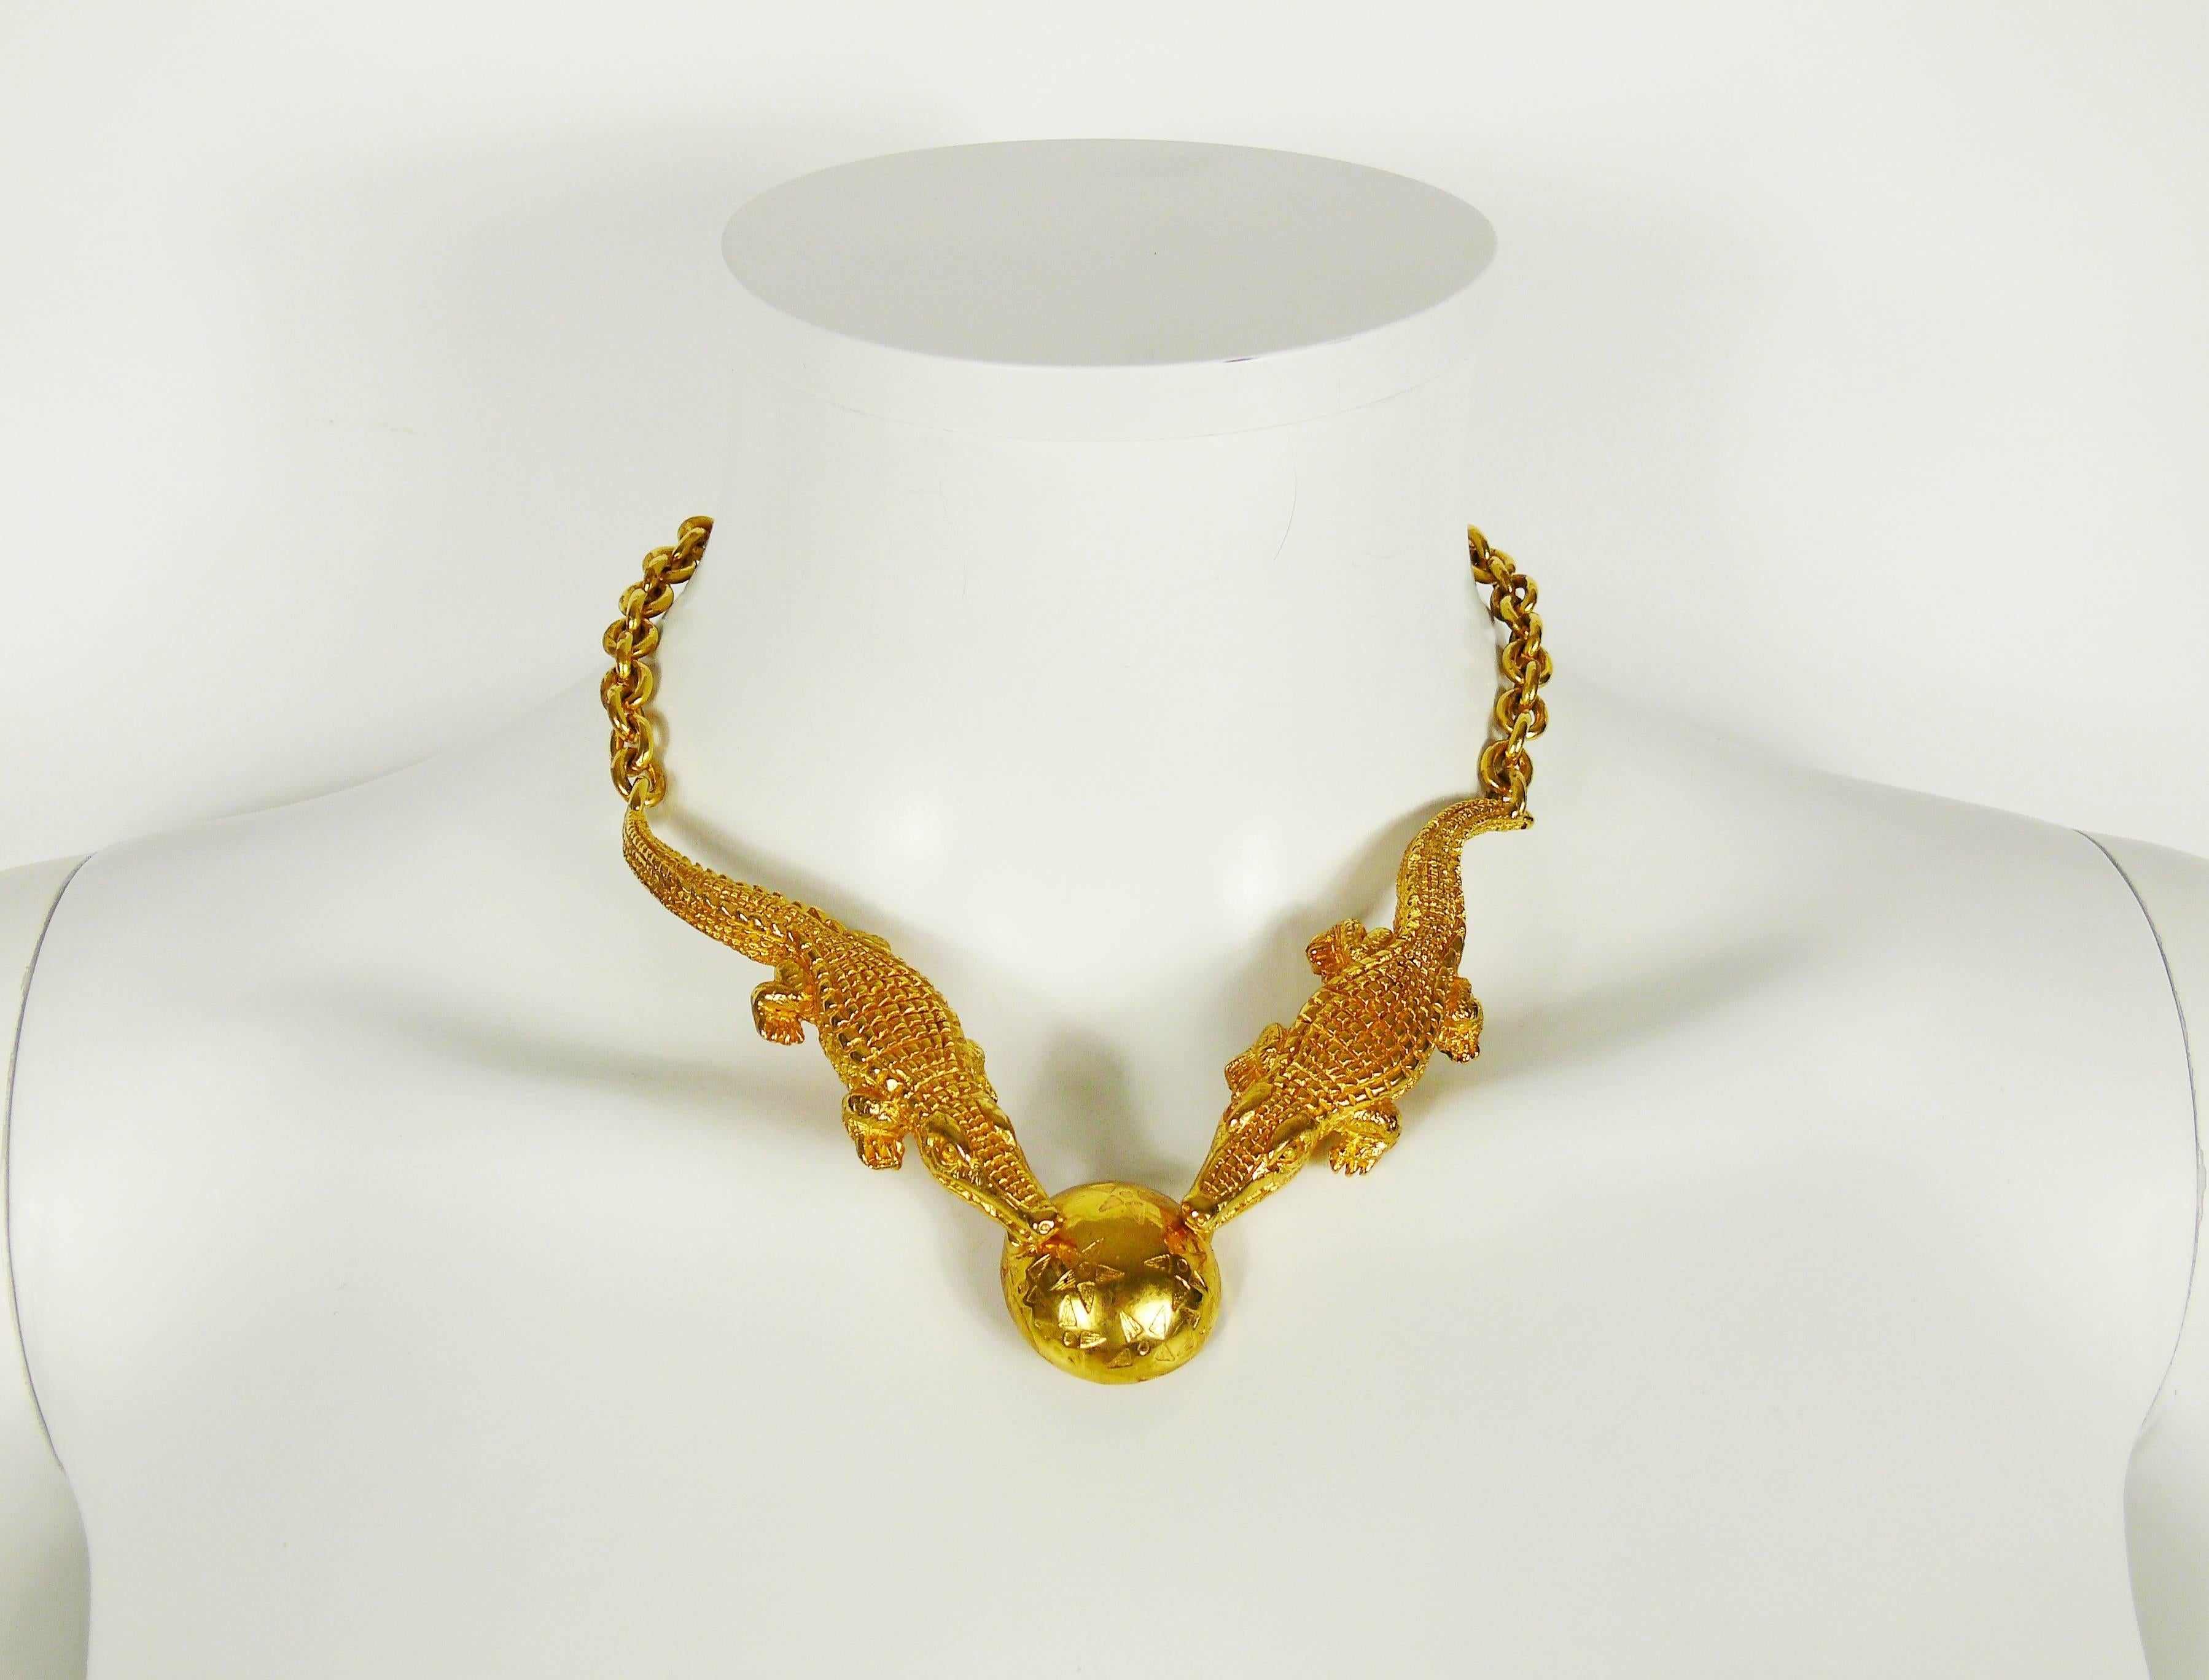 CELINE Paris vintage rare 1991 gold plated necklace featuring two crocodiles articulated on the iconic Maison star globe.

Marked CELINE 91 Made in Italy.

Lobster clasp closure.
Length is not adjustable.

Indicative measurements : length approx. 42